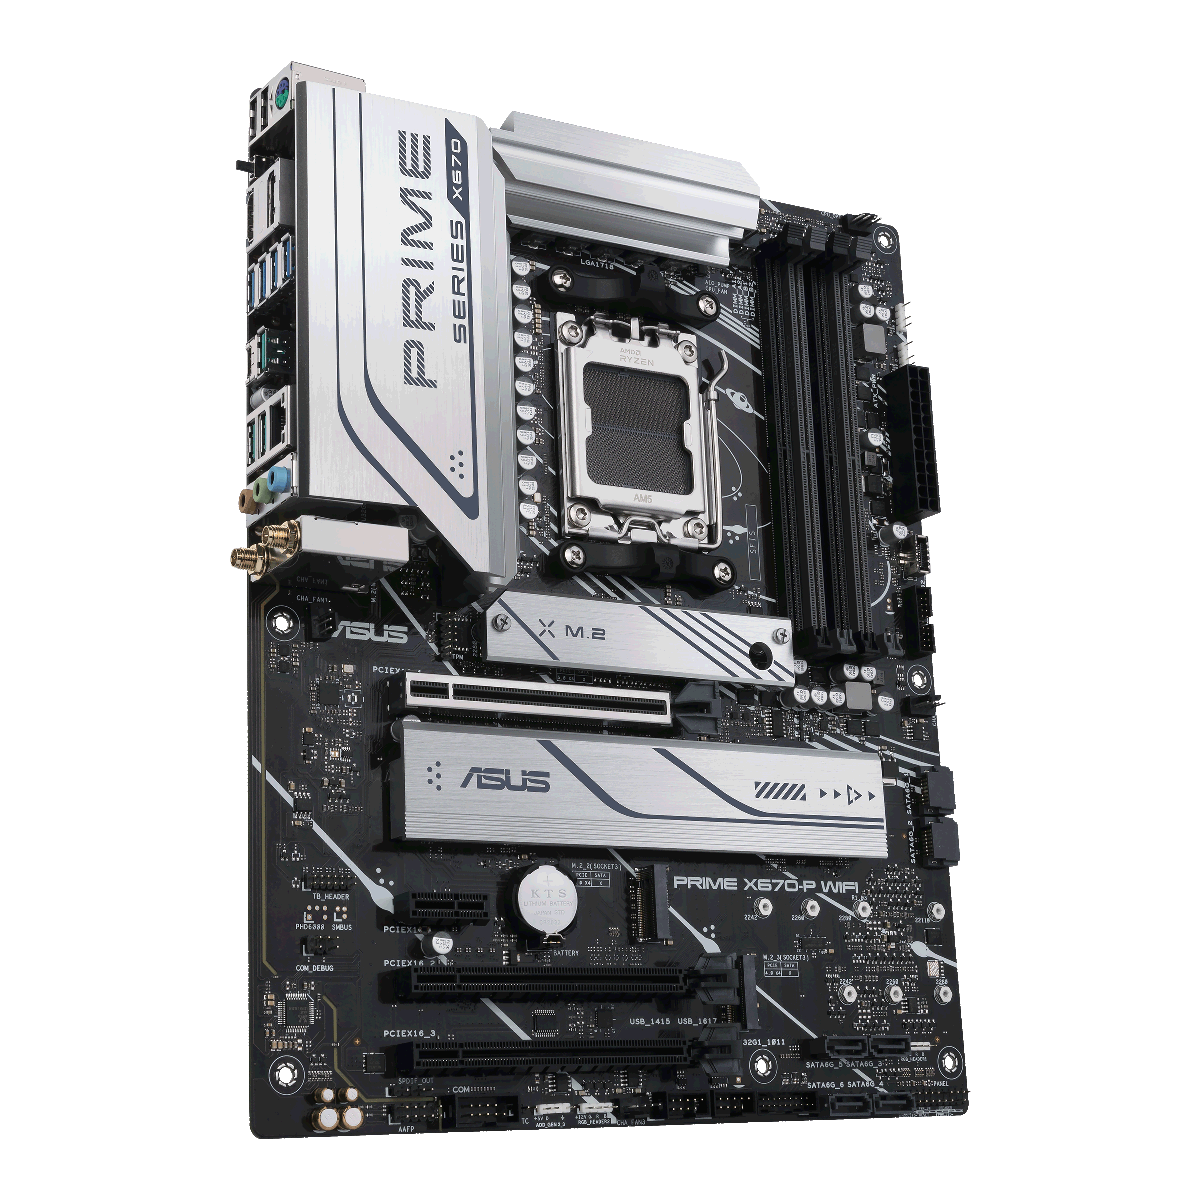 The PRIME X670-P WIFI-CSM motherboard features Aura Sync. 